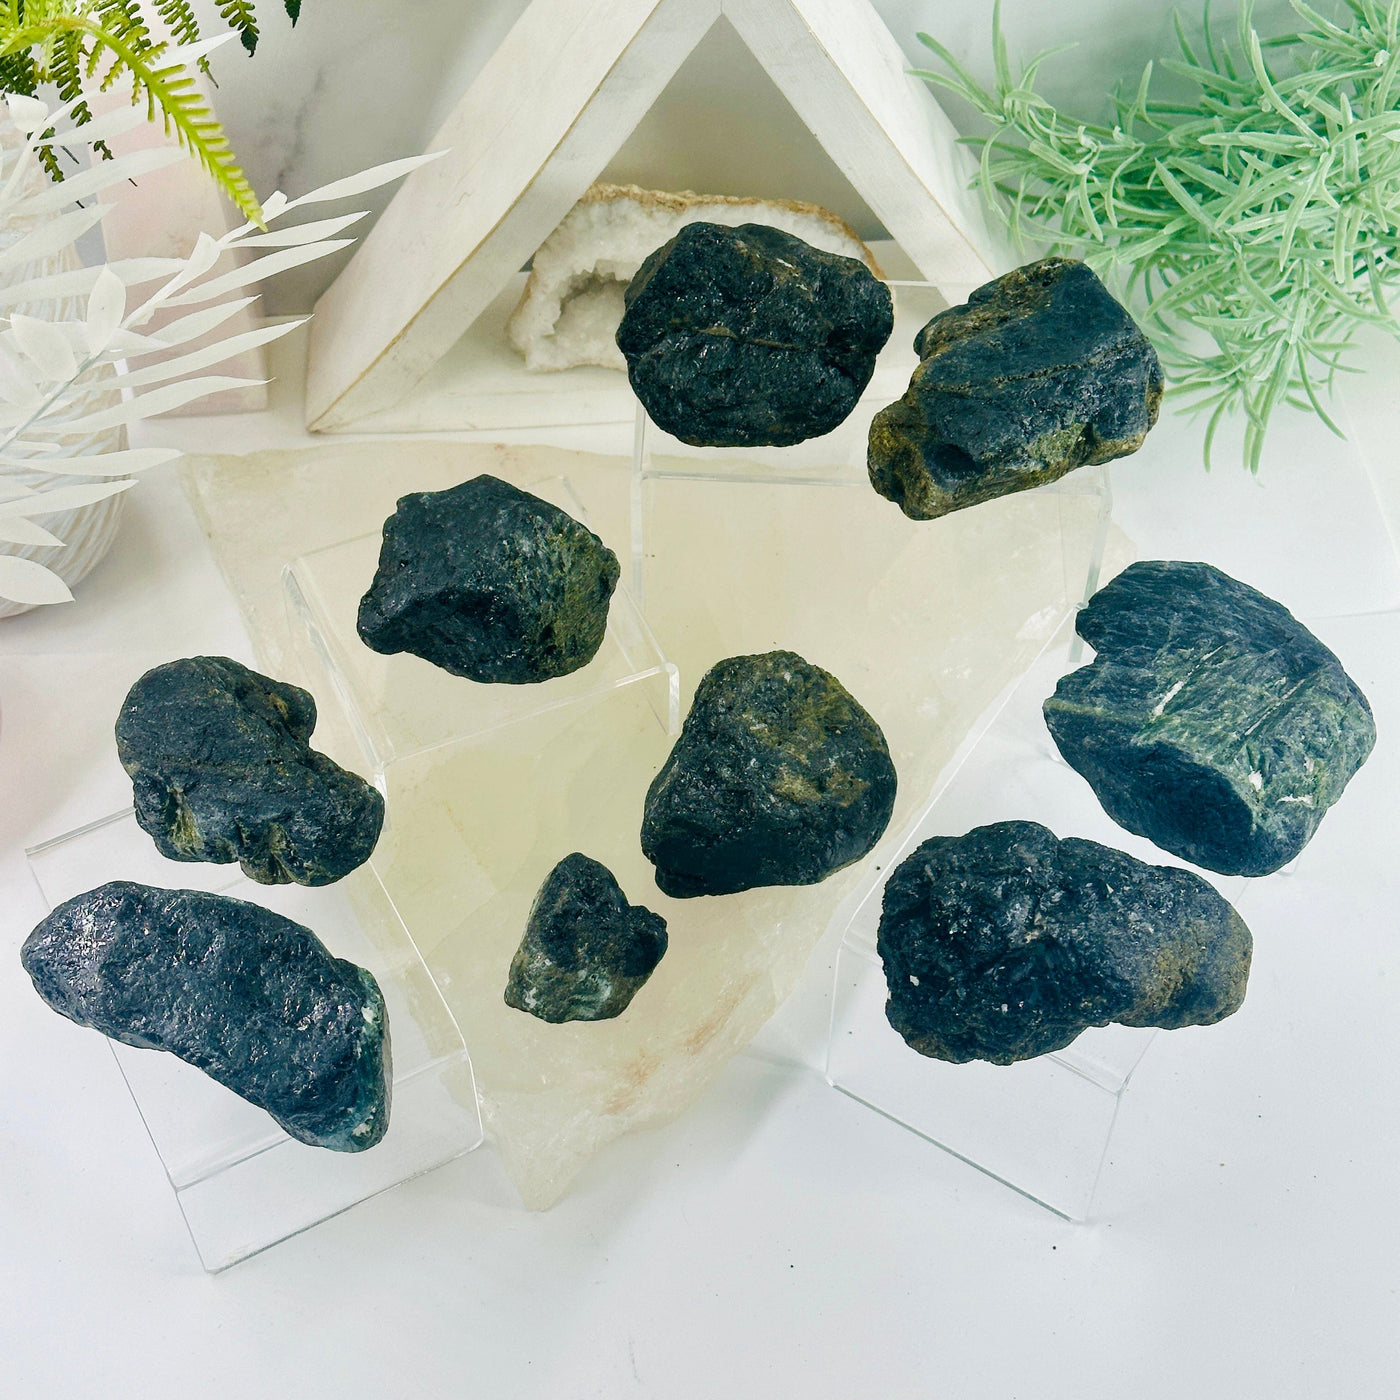 Green Tourmaline - Rough Stone - You Choose all variants arranged on acrylic stands and quartz platter with props in background